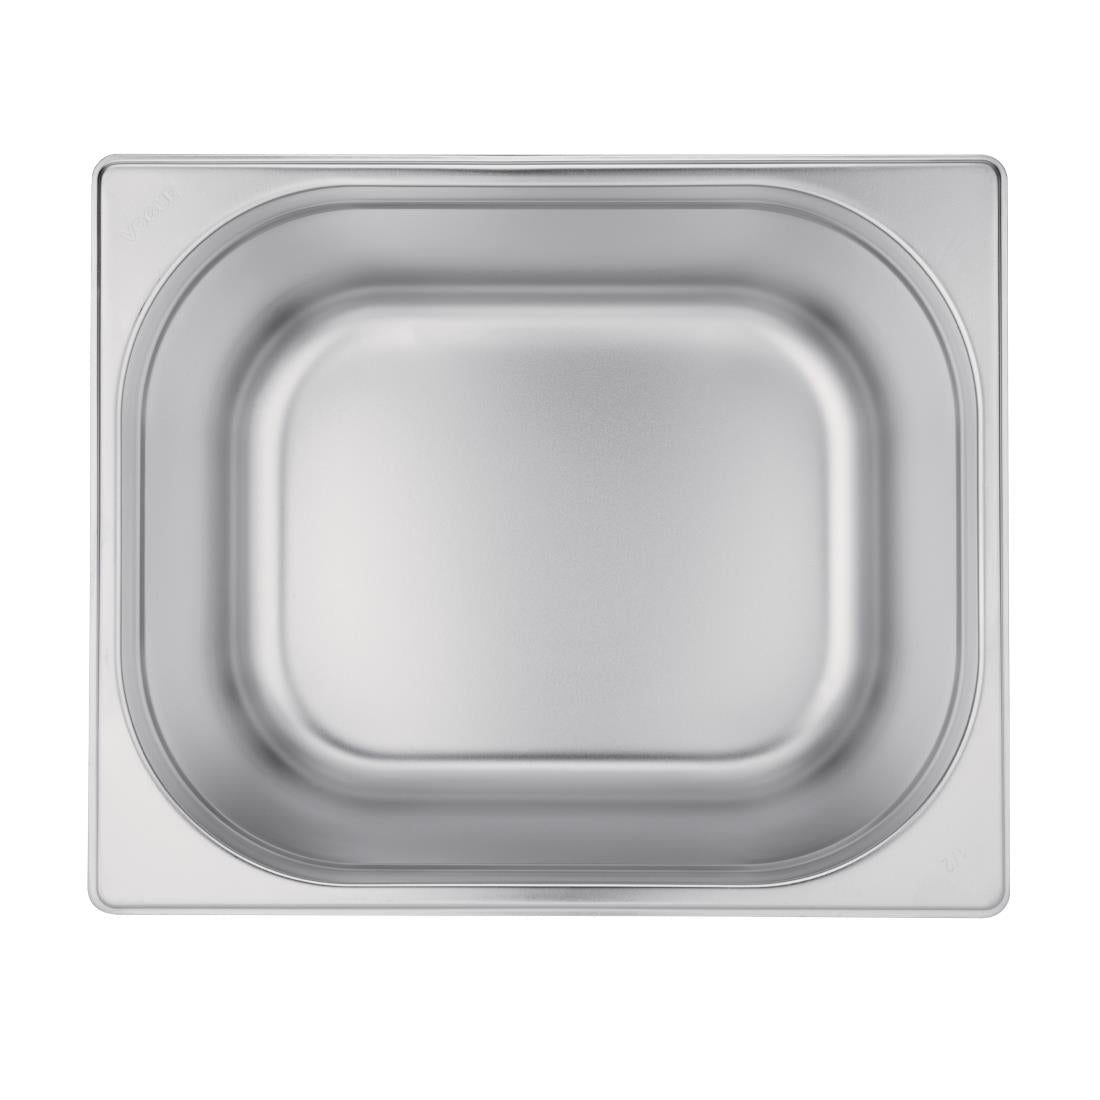 K932 Vogue Stainless Steel 1/2 Gastronorm Pan 200mm